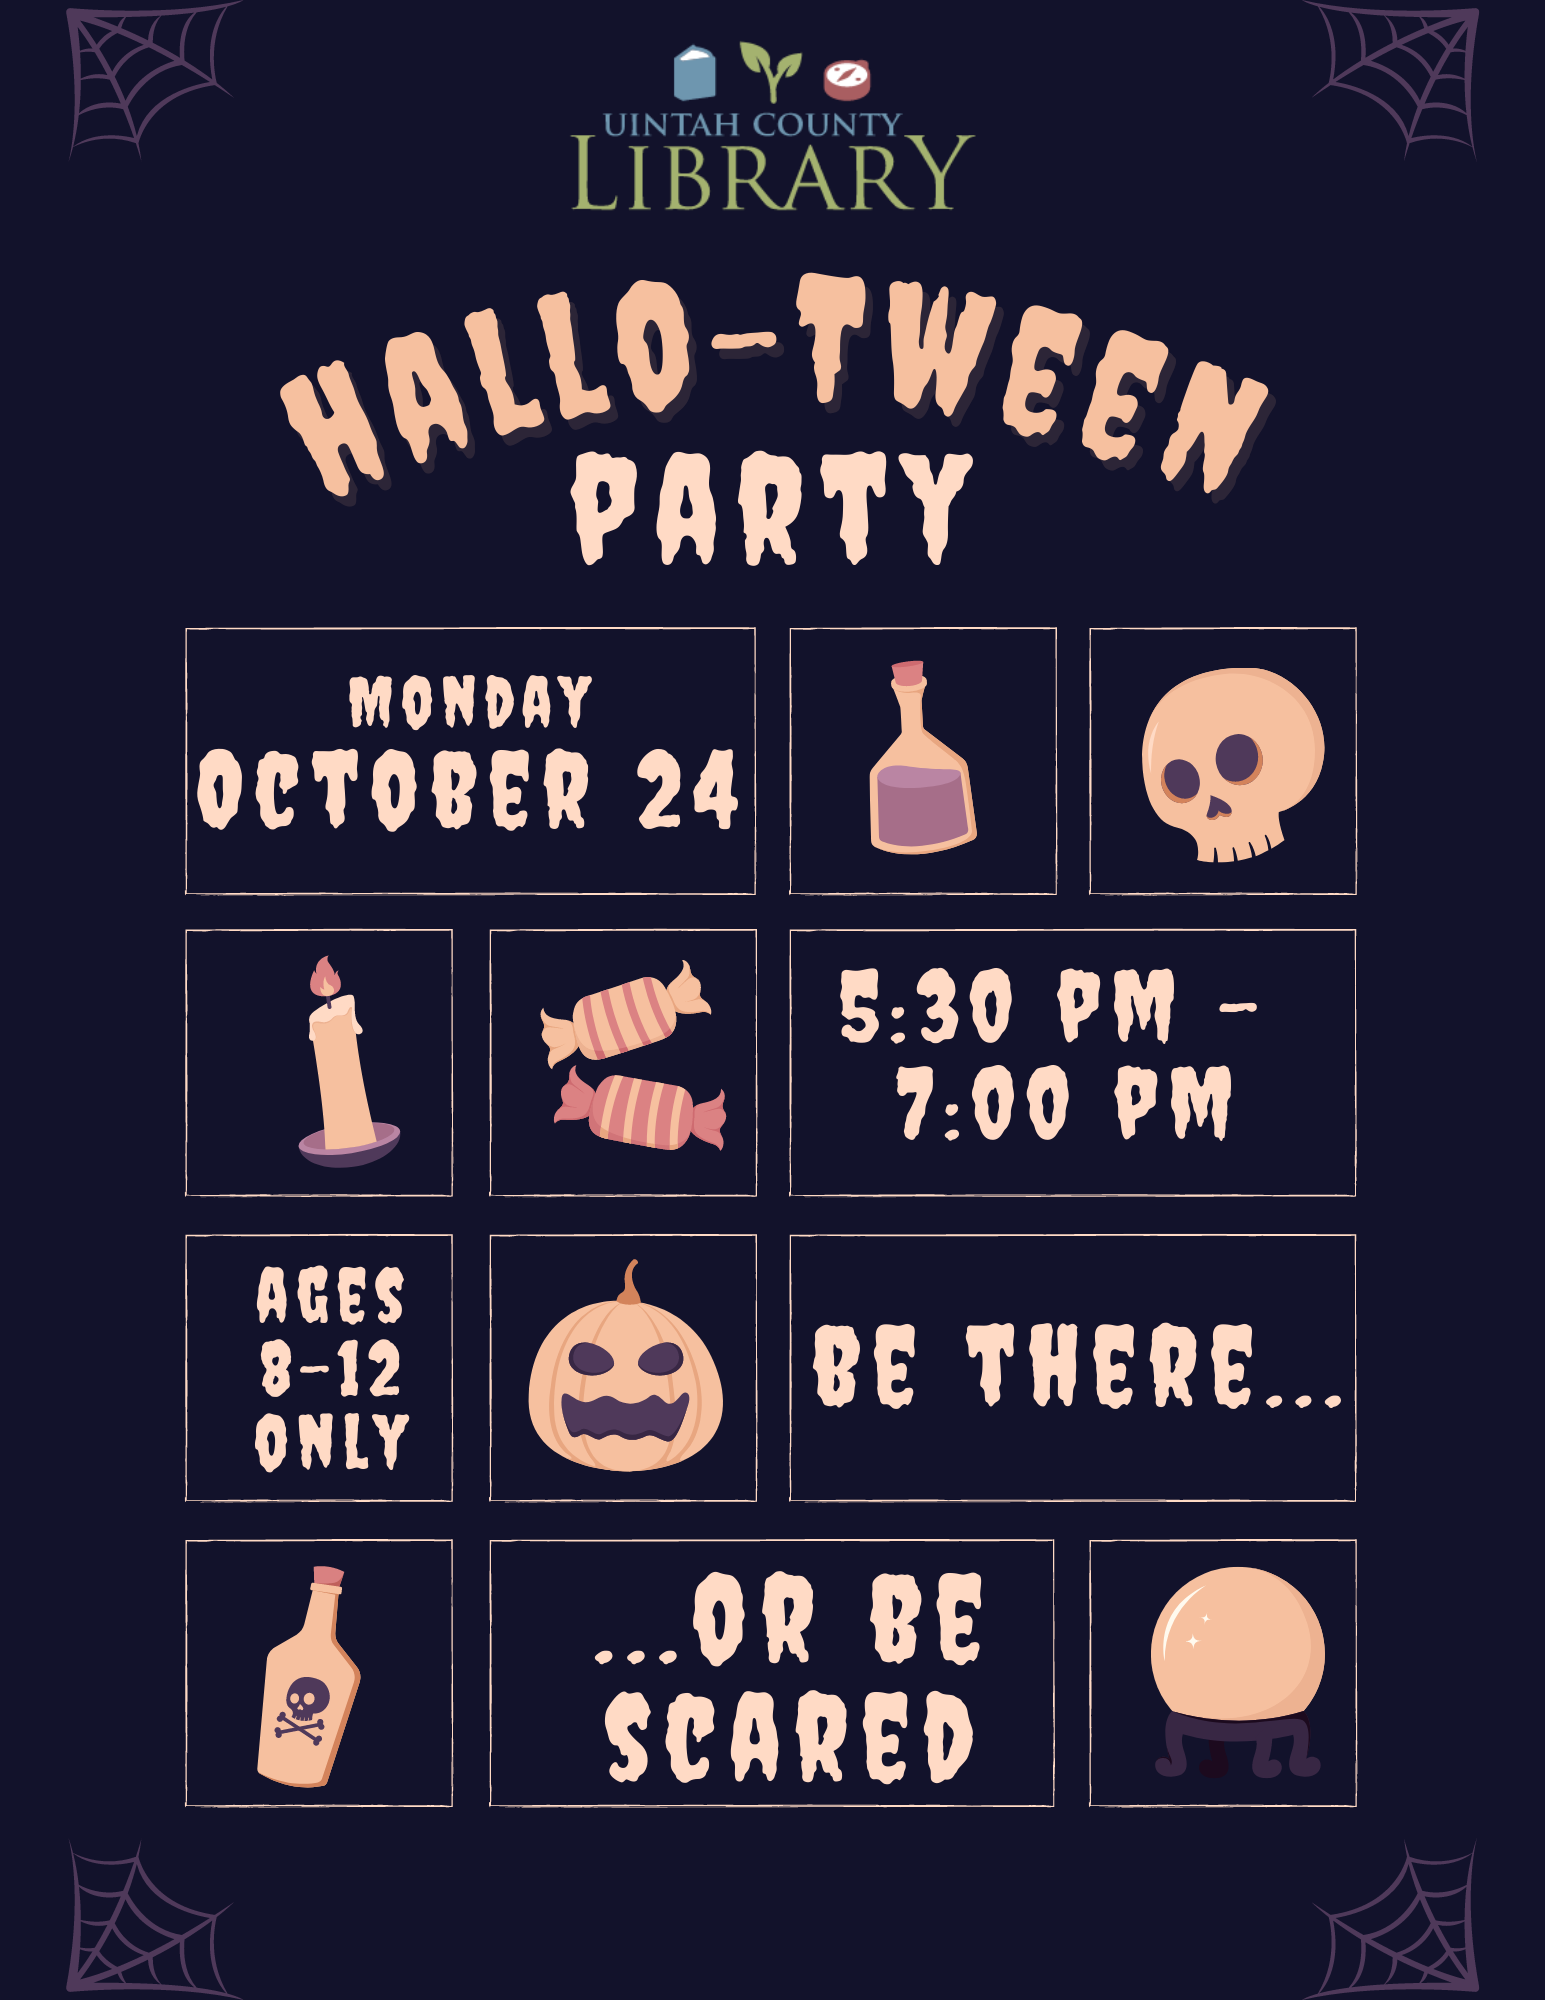 HALLO-TWEEN PARTY | Monday October 24 | 5:30 PM - 7:00 PM | Ages 8-12 only | Be there... | ...or be scared